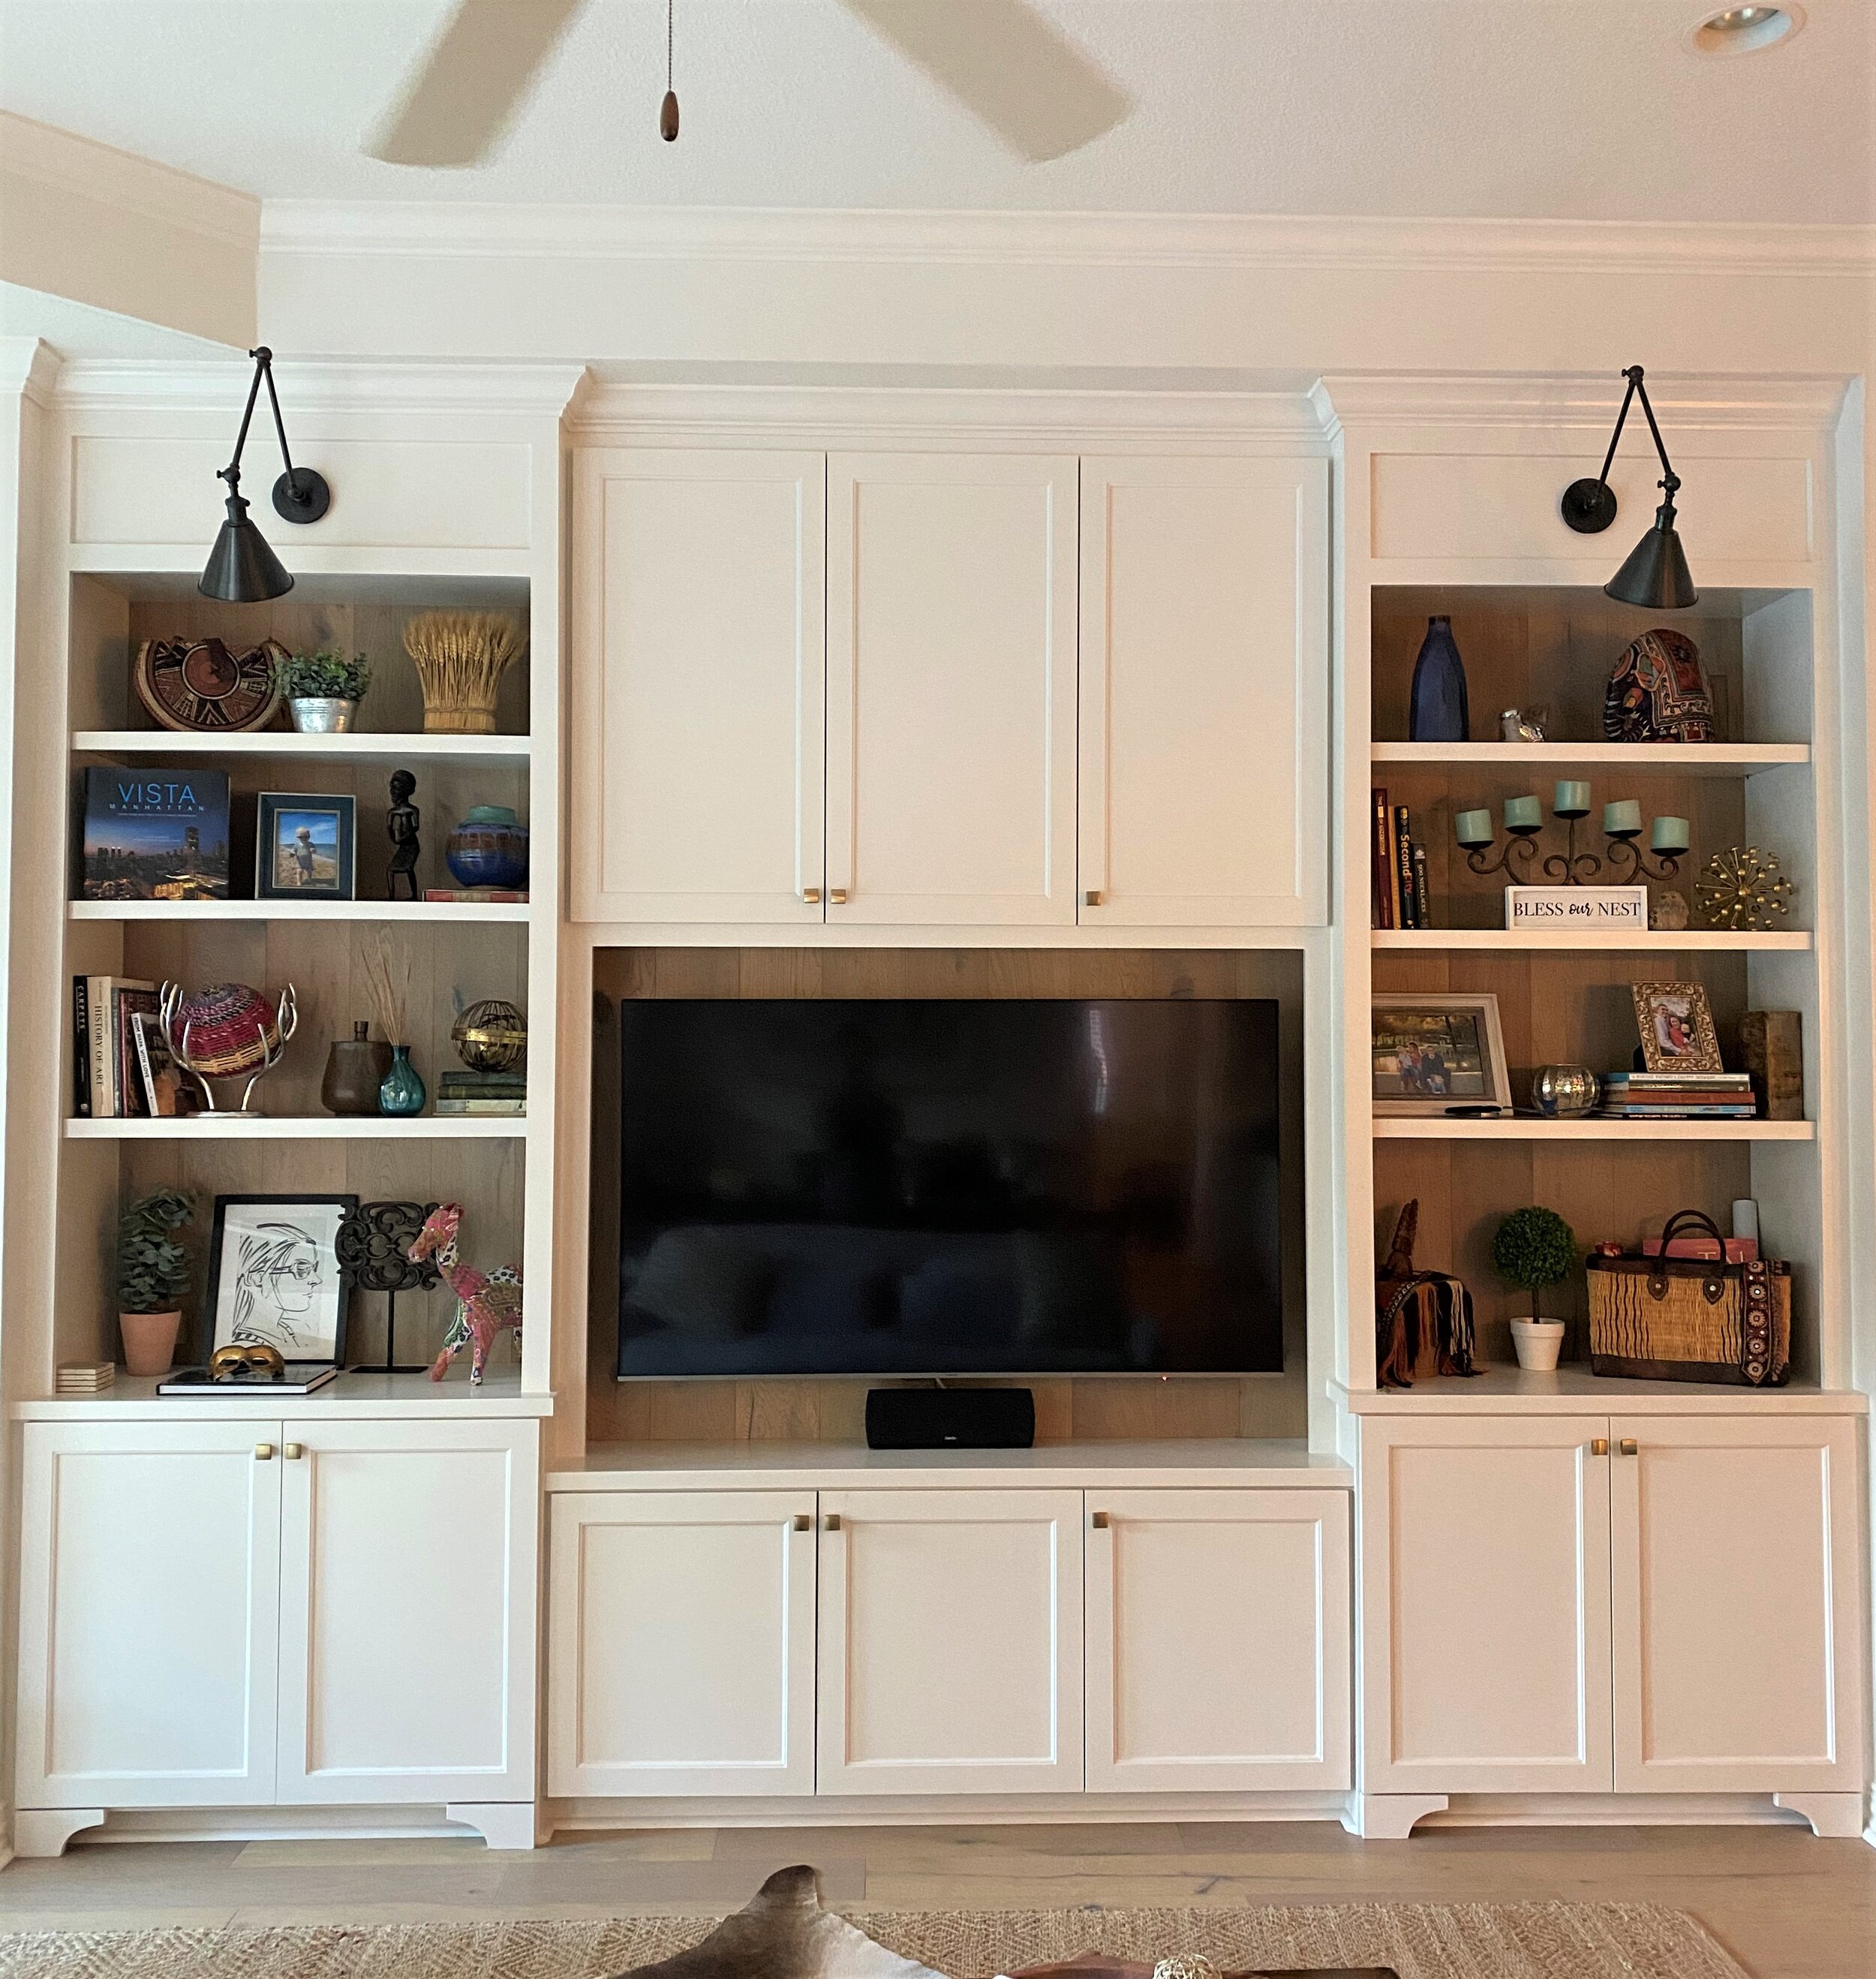 Cabinetry To House A Big Flat Screen Tv